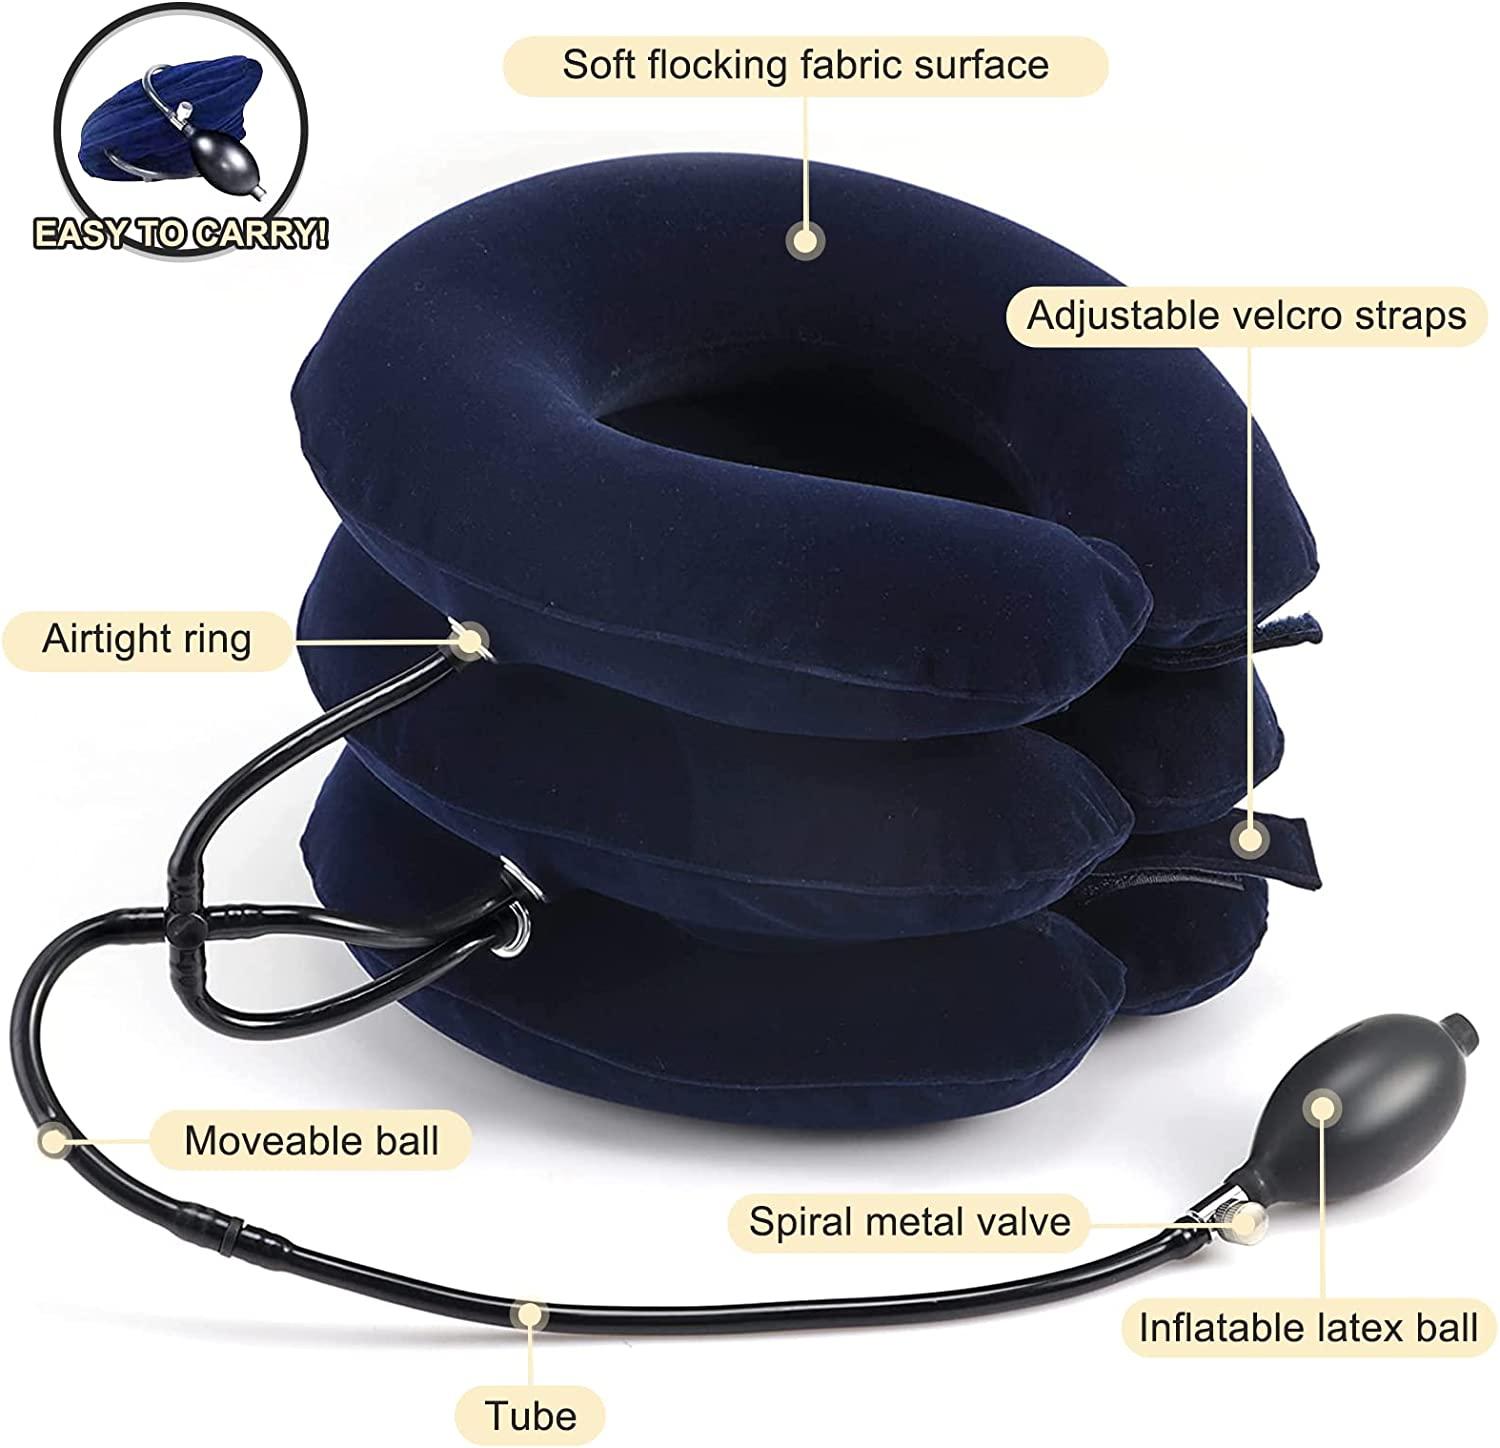 Cervical Neck Traction Device for Neck Pain Relief, Adjustable Inflatable  Neck Stretcher Neck Brace, Neck Traction Pillow for Use Neck Decompression  and Neck Tension Relief (Blue)